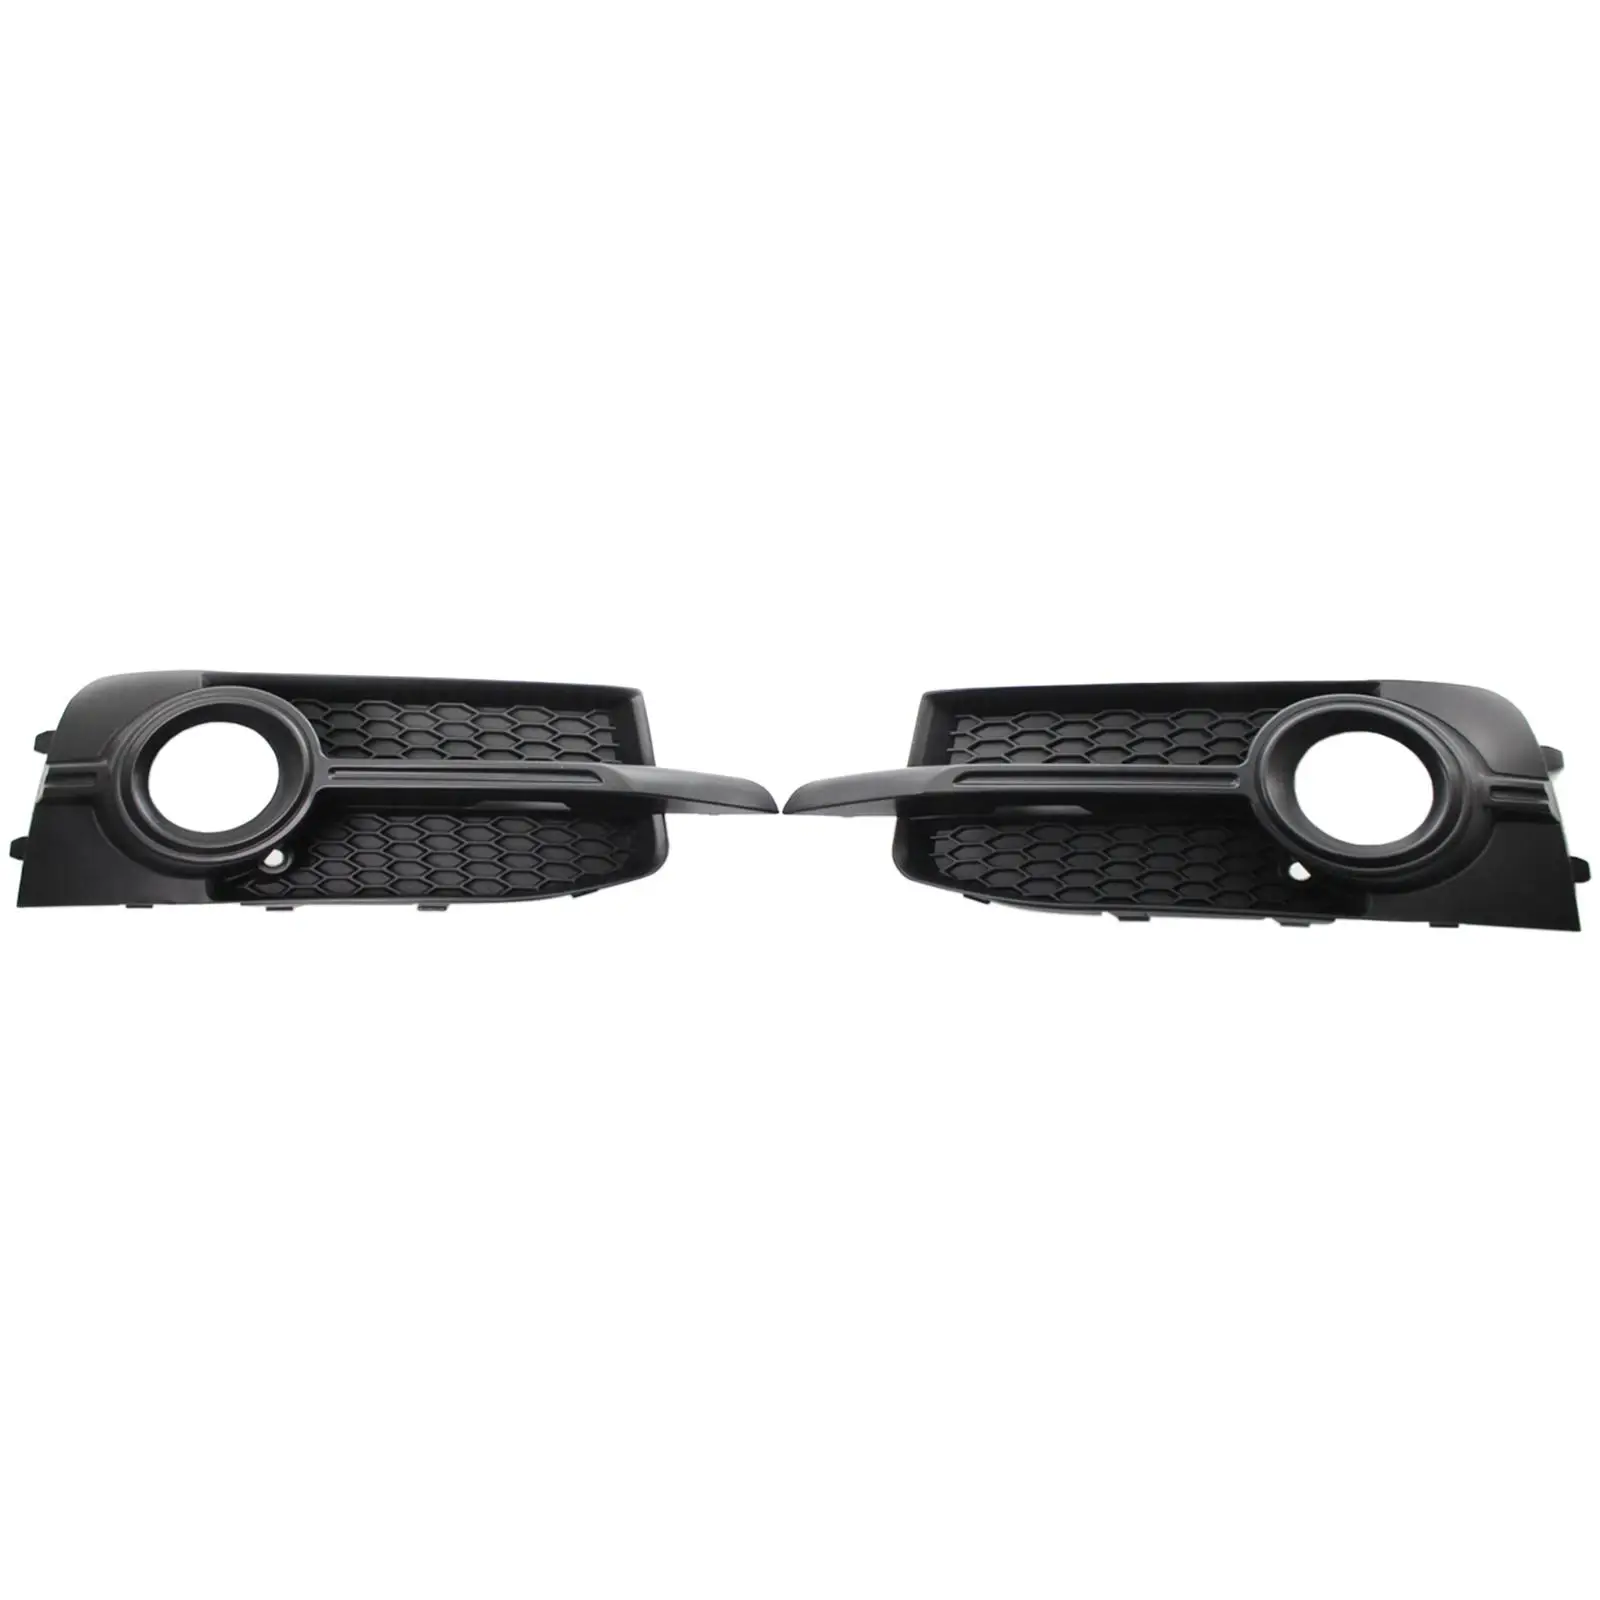 

1 Pair Front Fog Light Grille 8x0807681B 8x0807682B Fog Lamp Frame Bezel Cover Fit for Audi A1 8x S Line Assembly Car Supplies